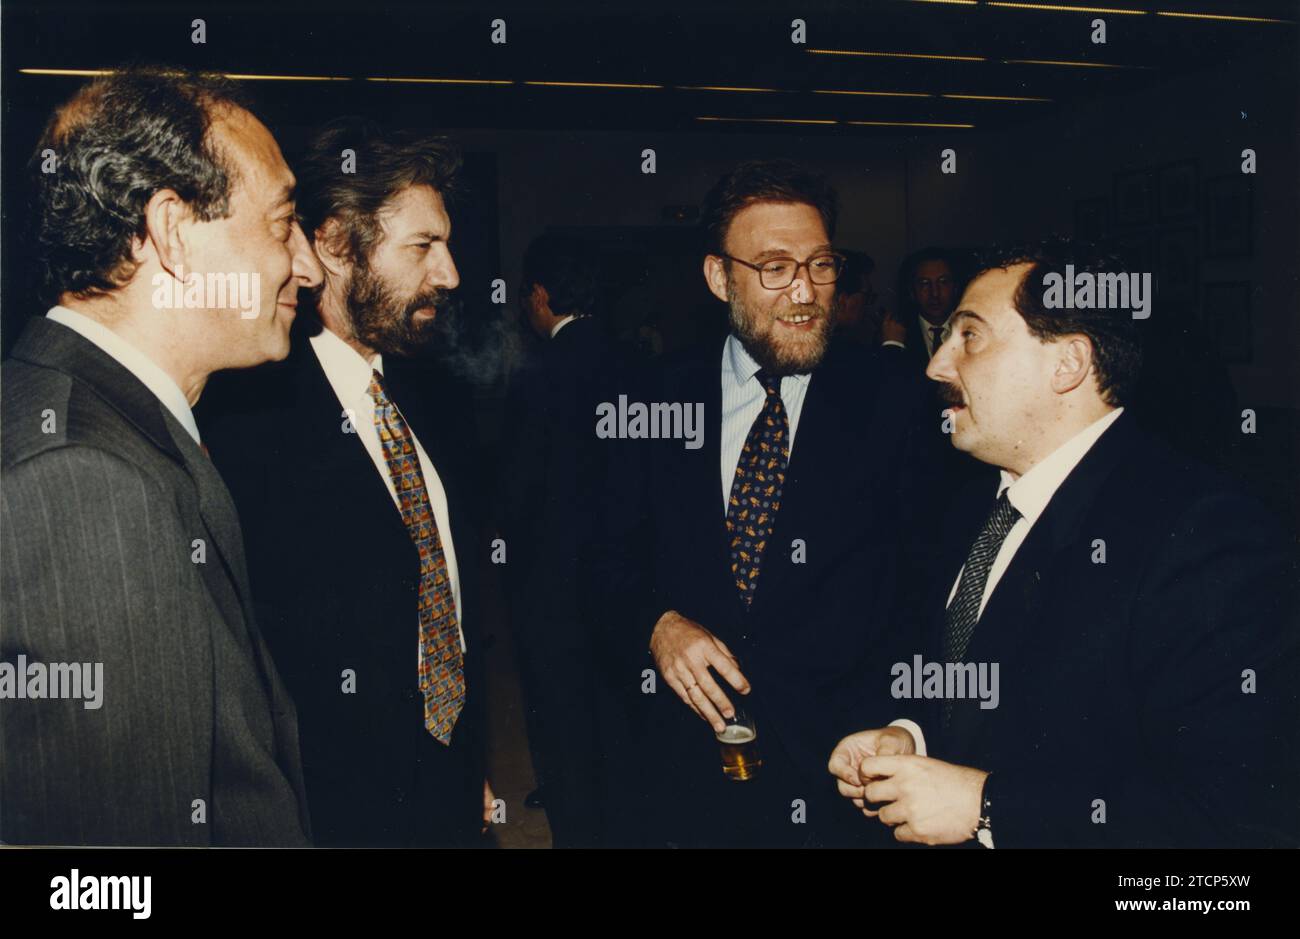 Madrid, 3/13/1997.- Dinner tribute to Luis María Anson for his election as an academic of the Royal Spanish Academy, held at the ABC Library. In the photo, from left to right: Ángel Antonio González Pérez, José Luis Gutiérrez, José Antonio Sentís and Enrique Ortego. Credit: Album / Archivo ABC / Jaime García Stock Photo